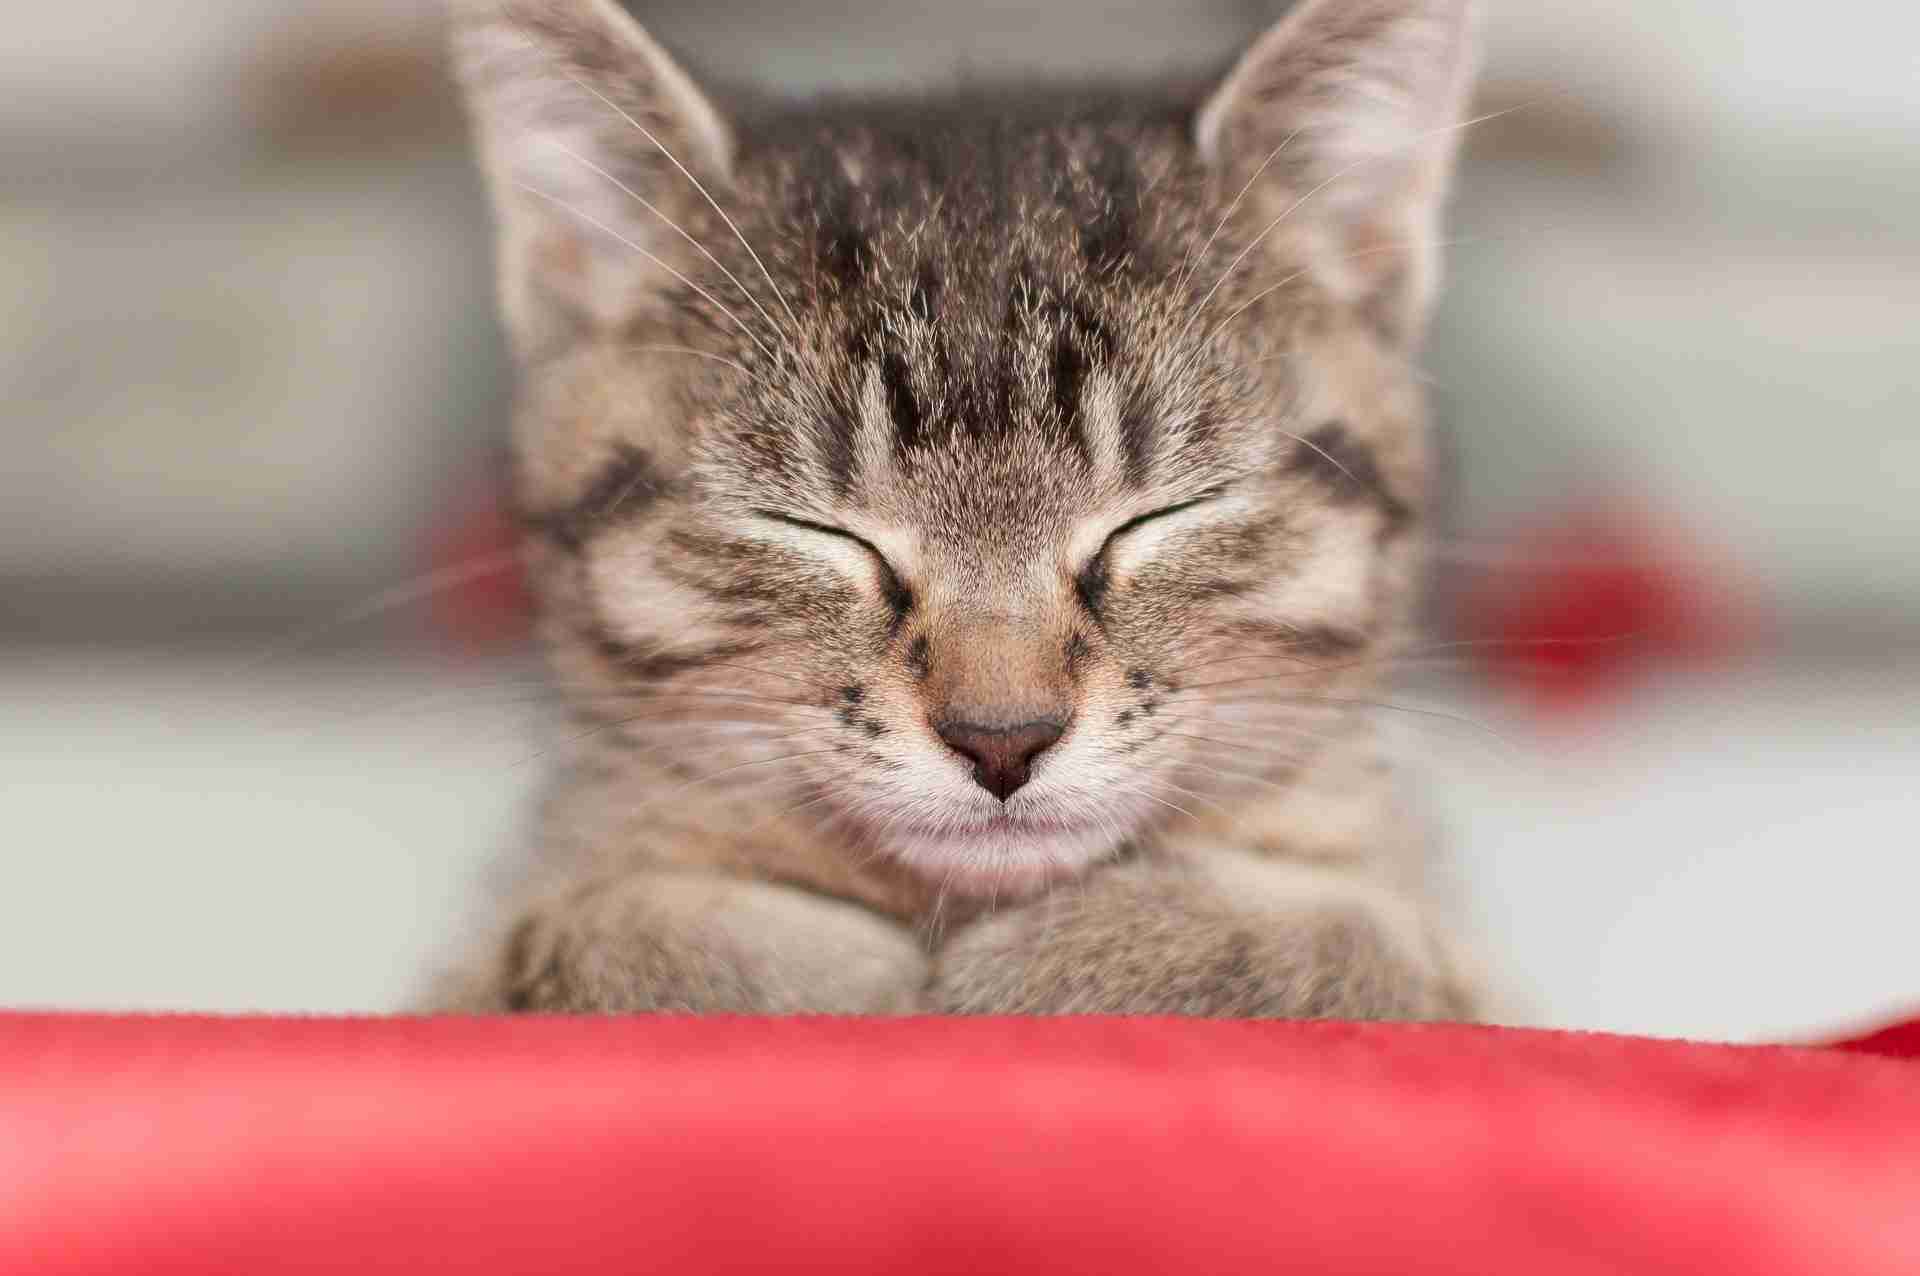 A new kitten arrives: how to welcome them